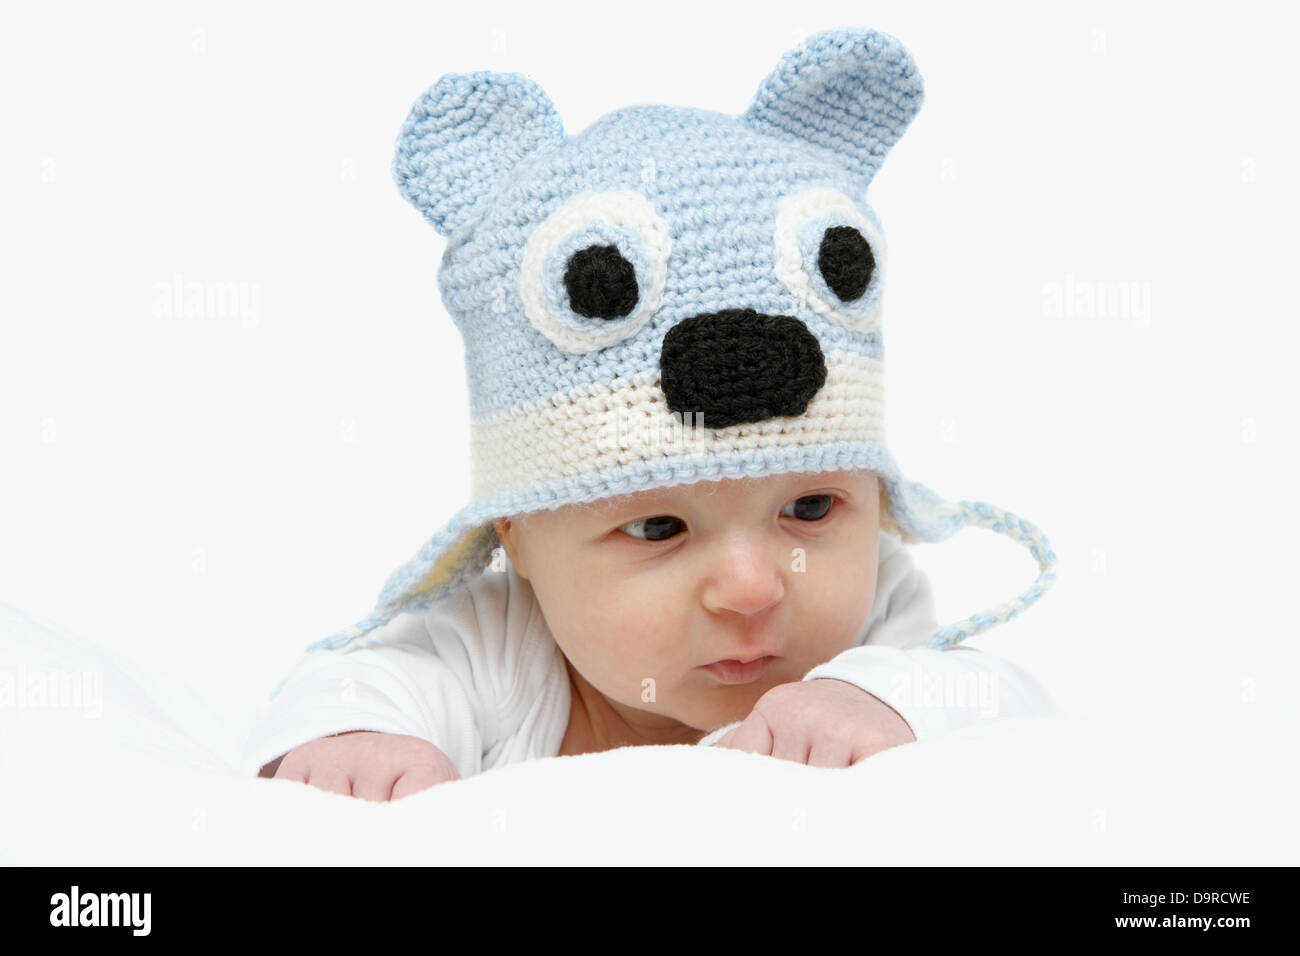 Baby with a knitted blue hat on stomach Stock Photo